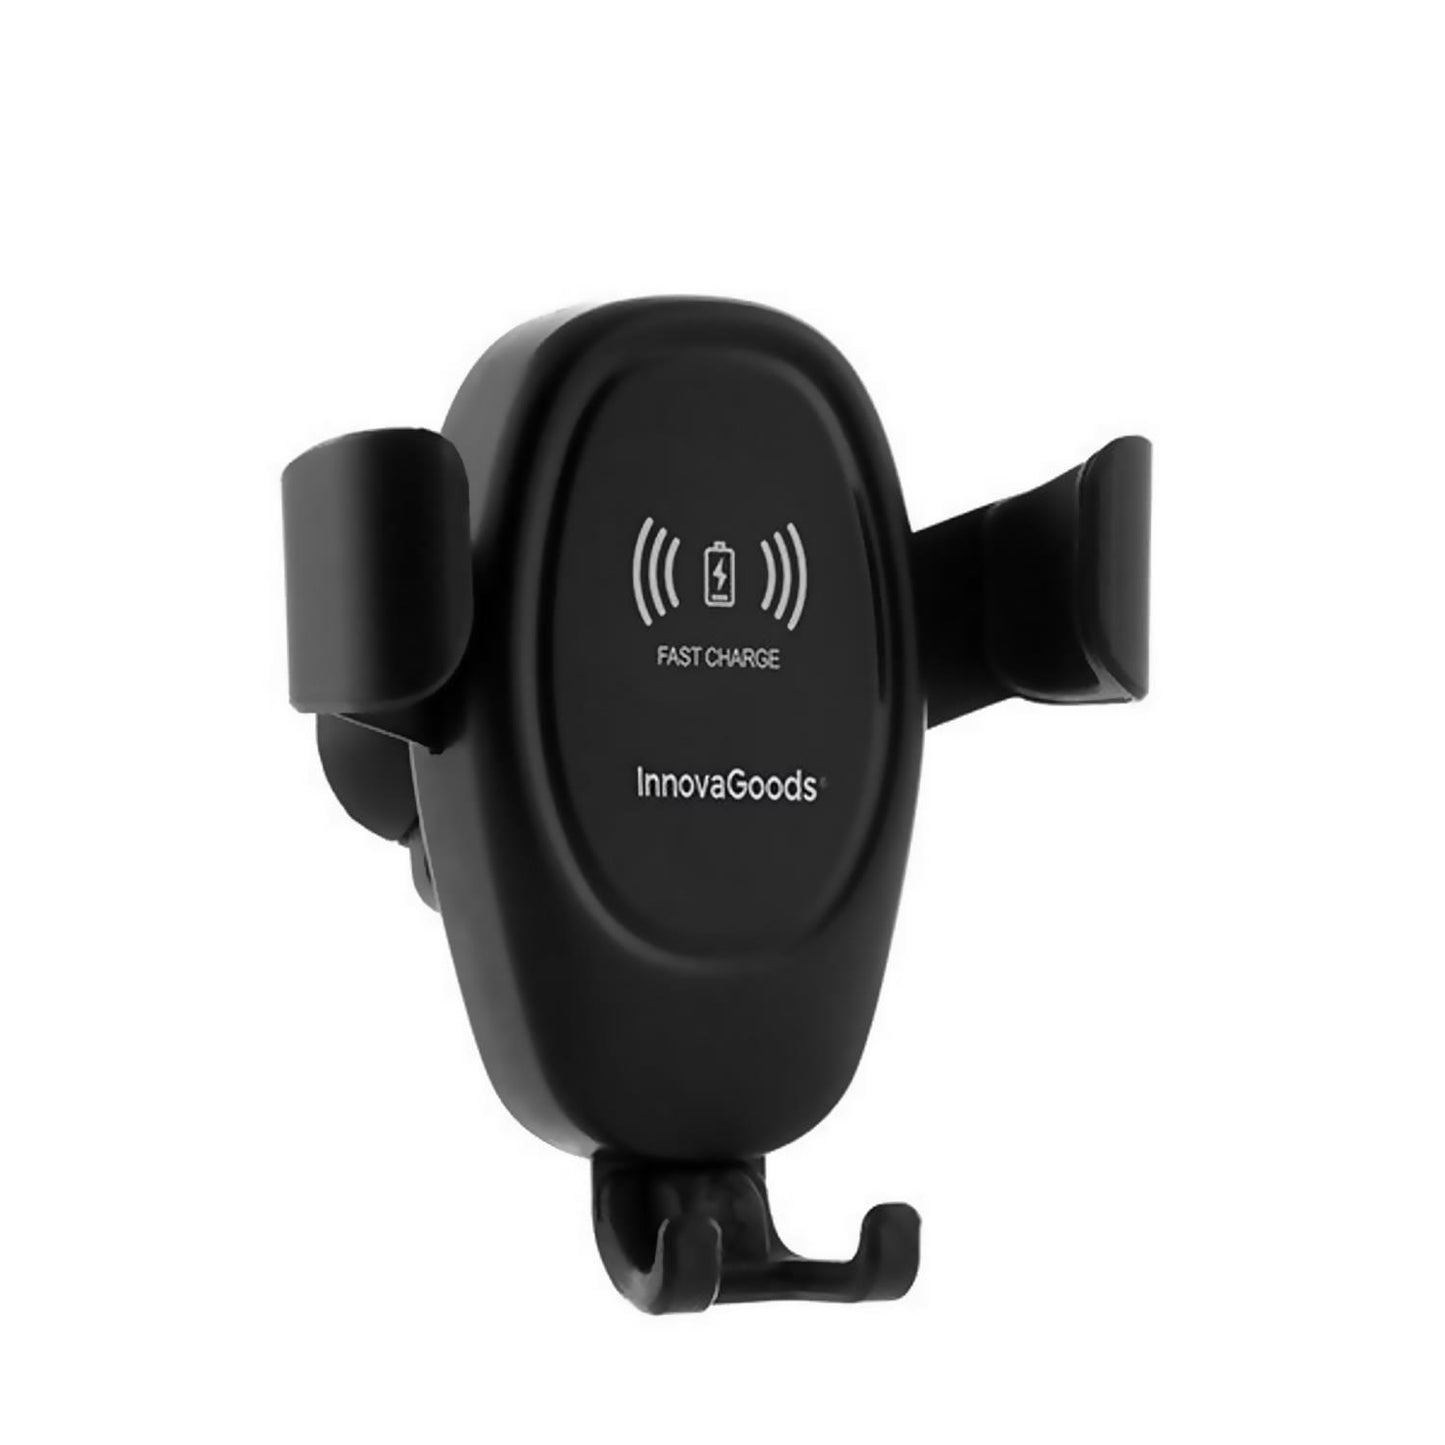 Quick Charge Wireless Car Charger For Iphone And Android